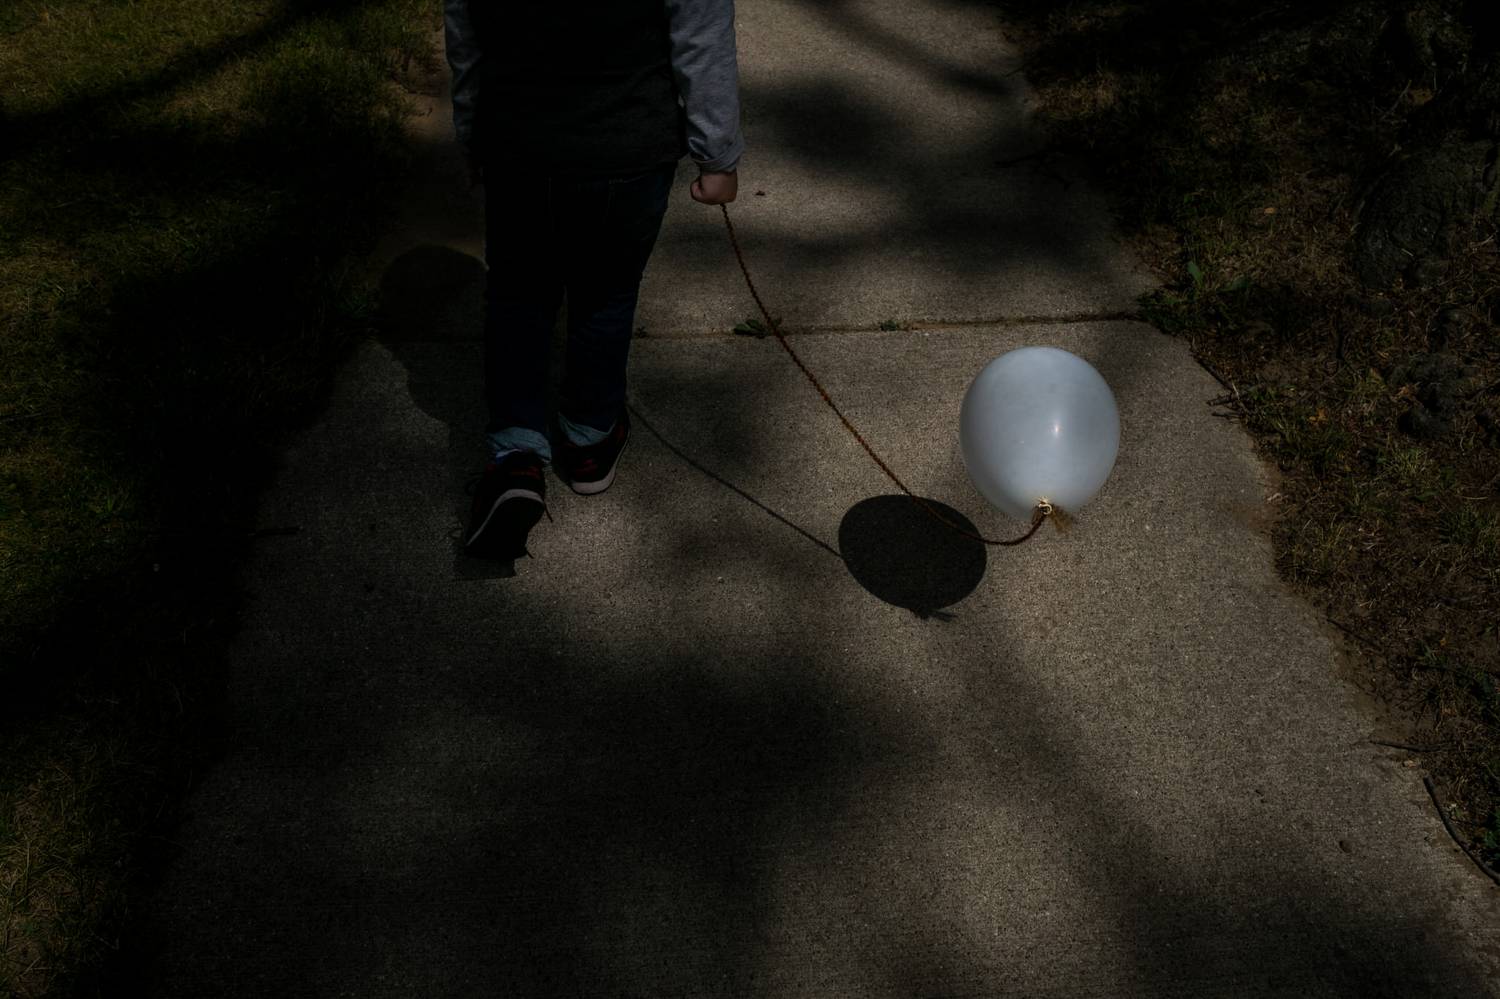 A child walking holding a balloon (Photo by Kirsten Lewis)